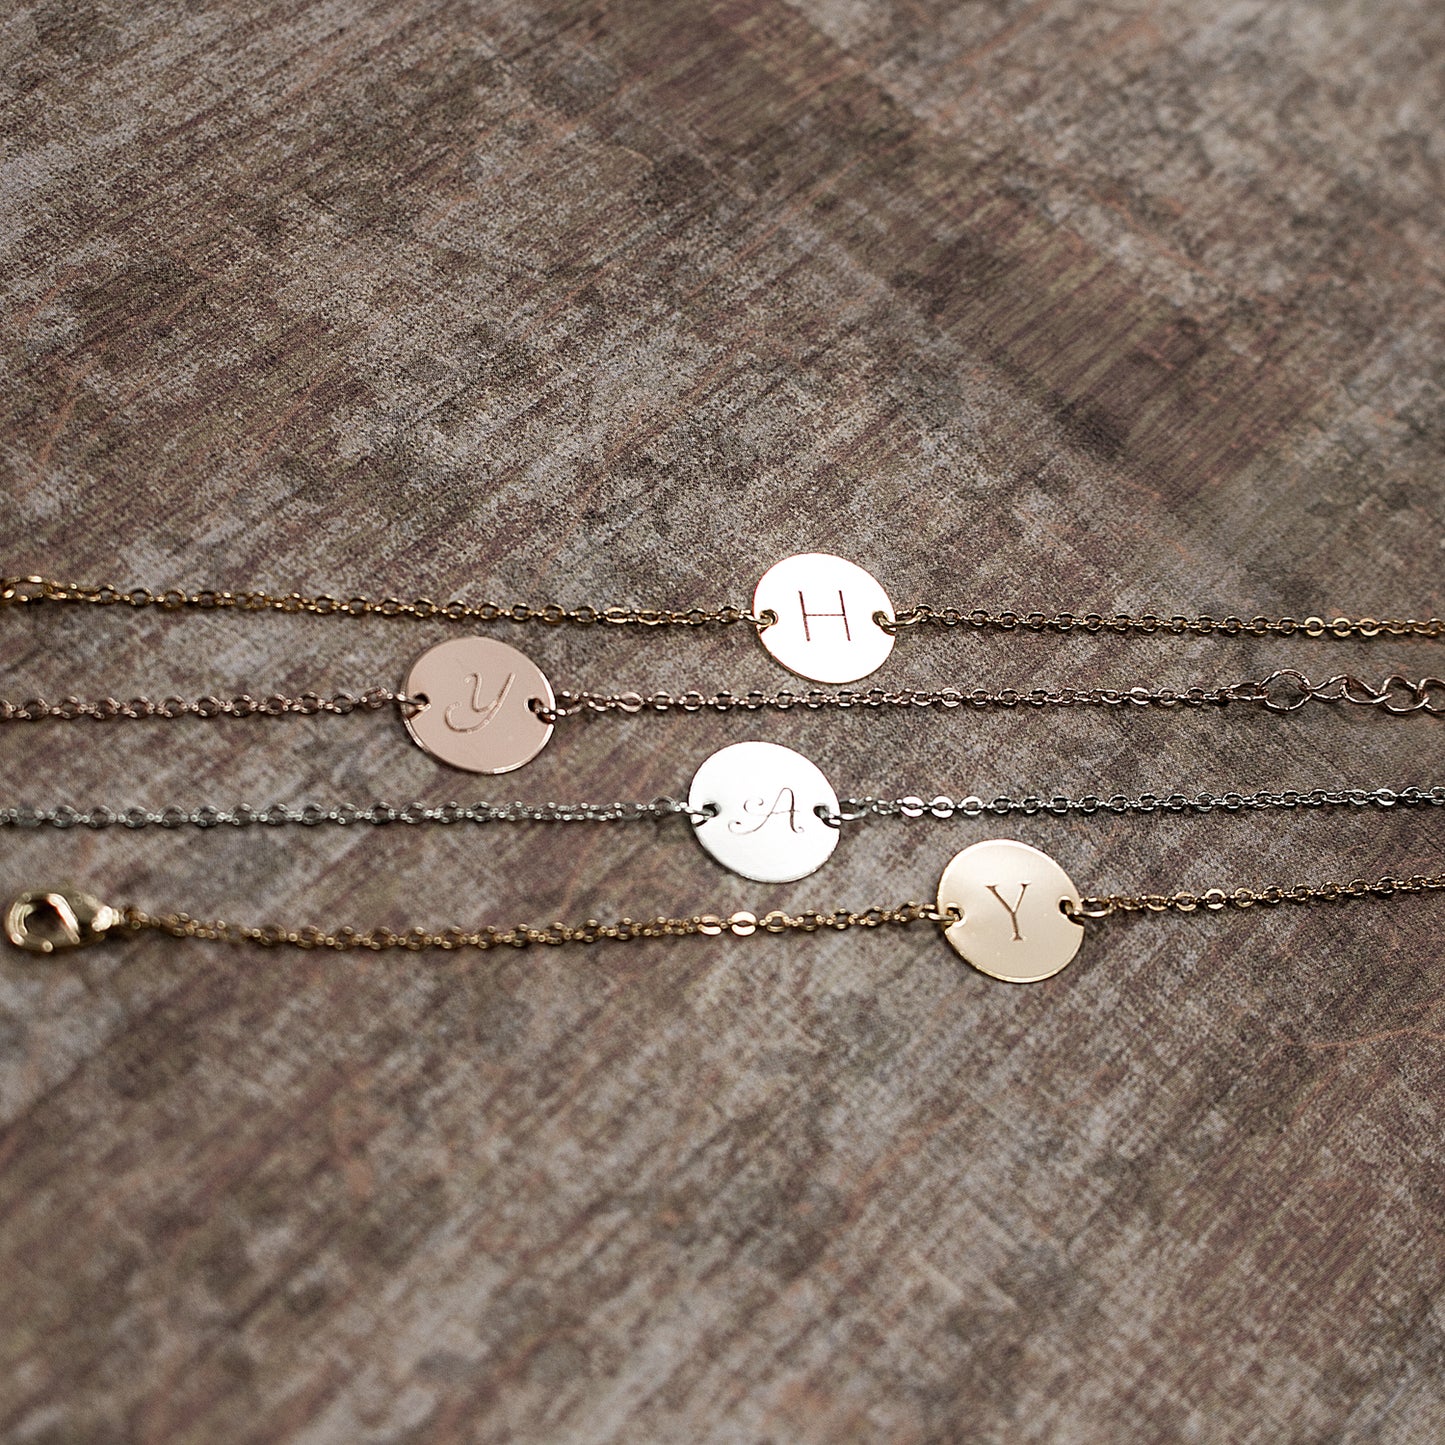 Personalized Initial Disc Bracelet - Hand stamped 16K Plated Dainty